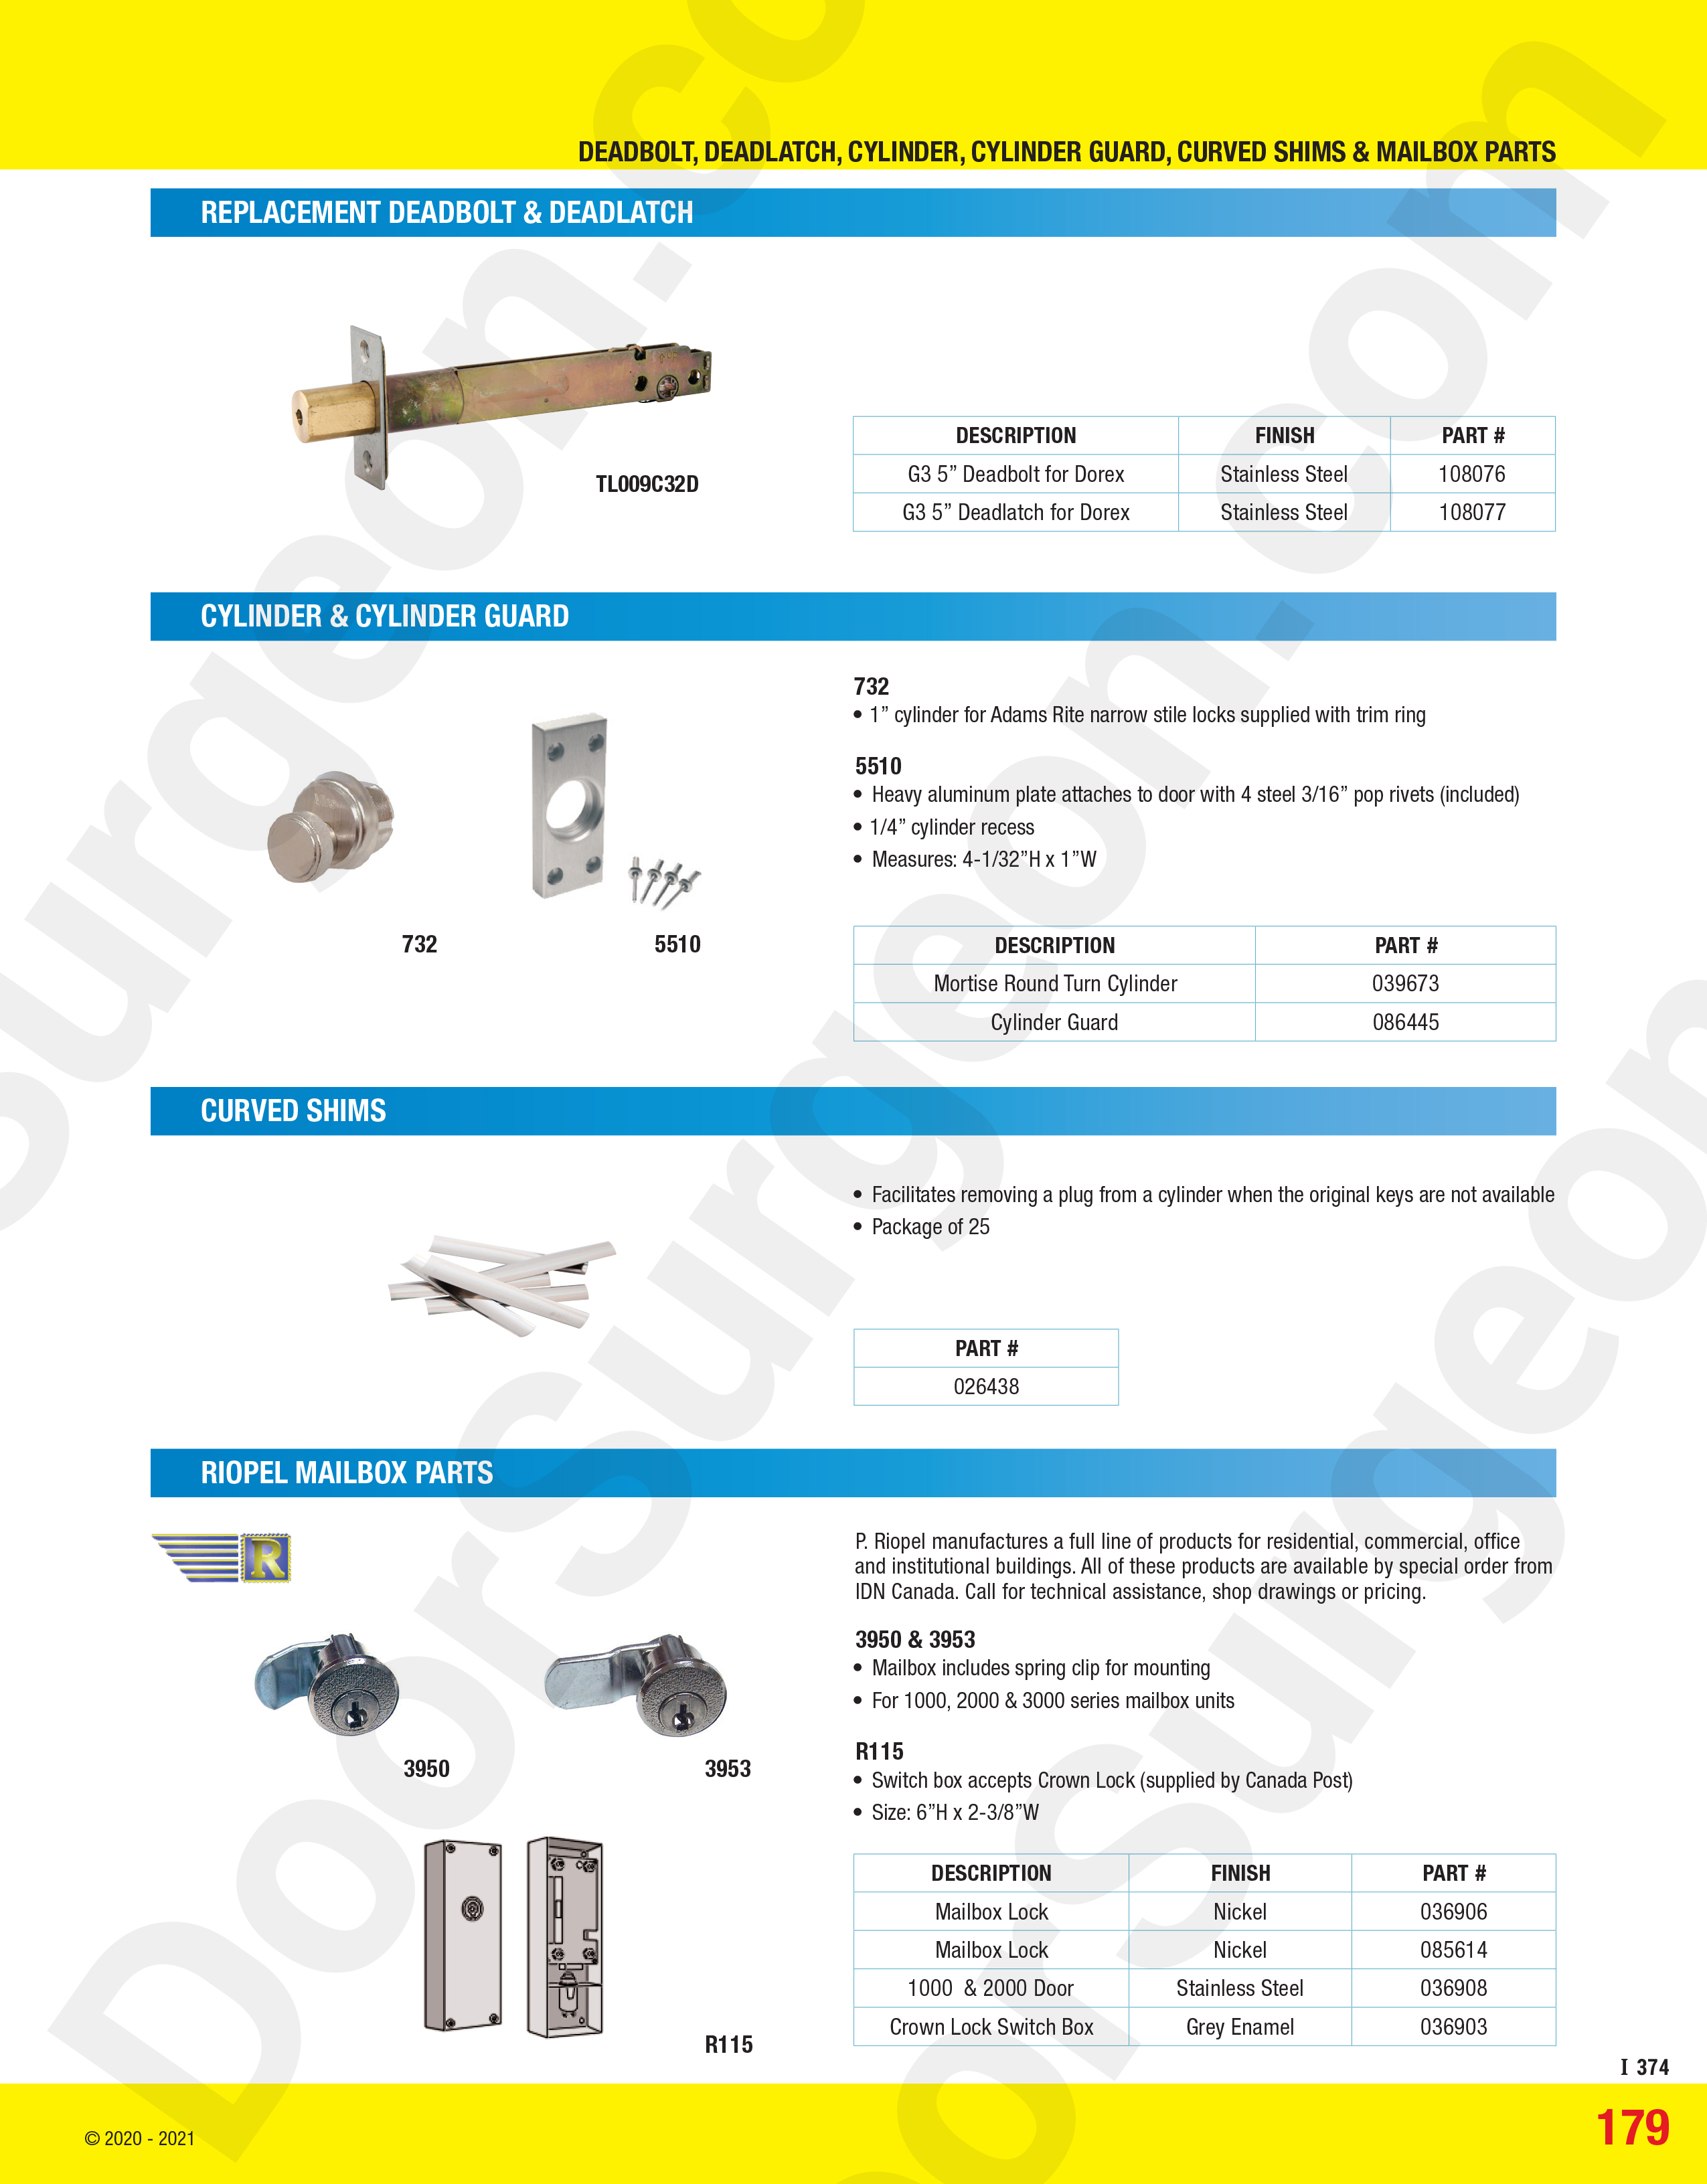 Door Surgeon 5inch deadbolt deadlatch cylinder-guard shims and mailbox parts sales and installation.